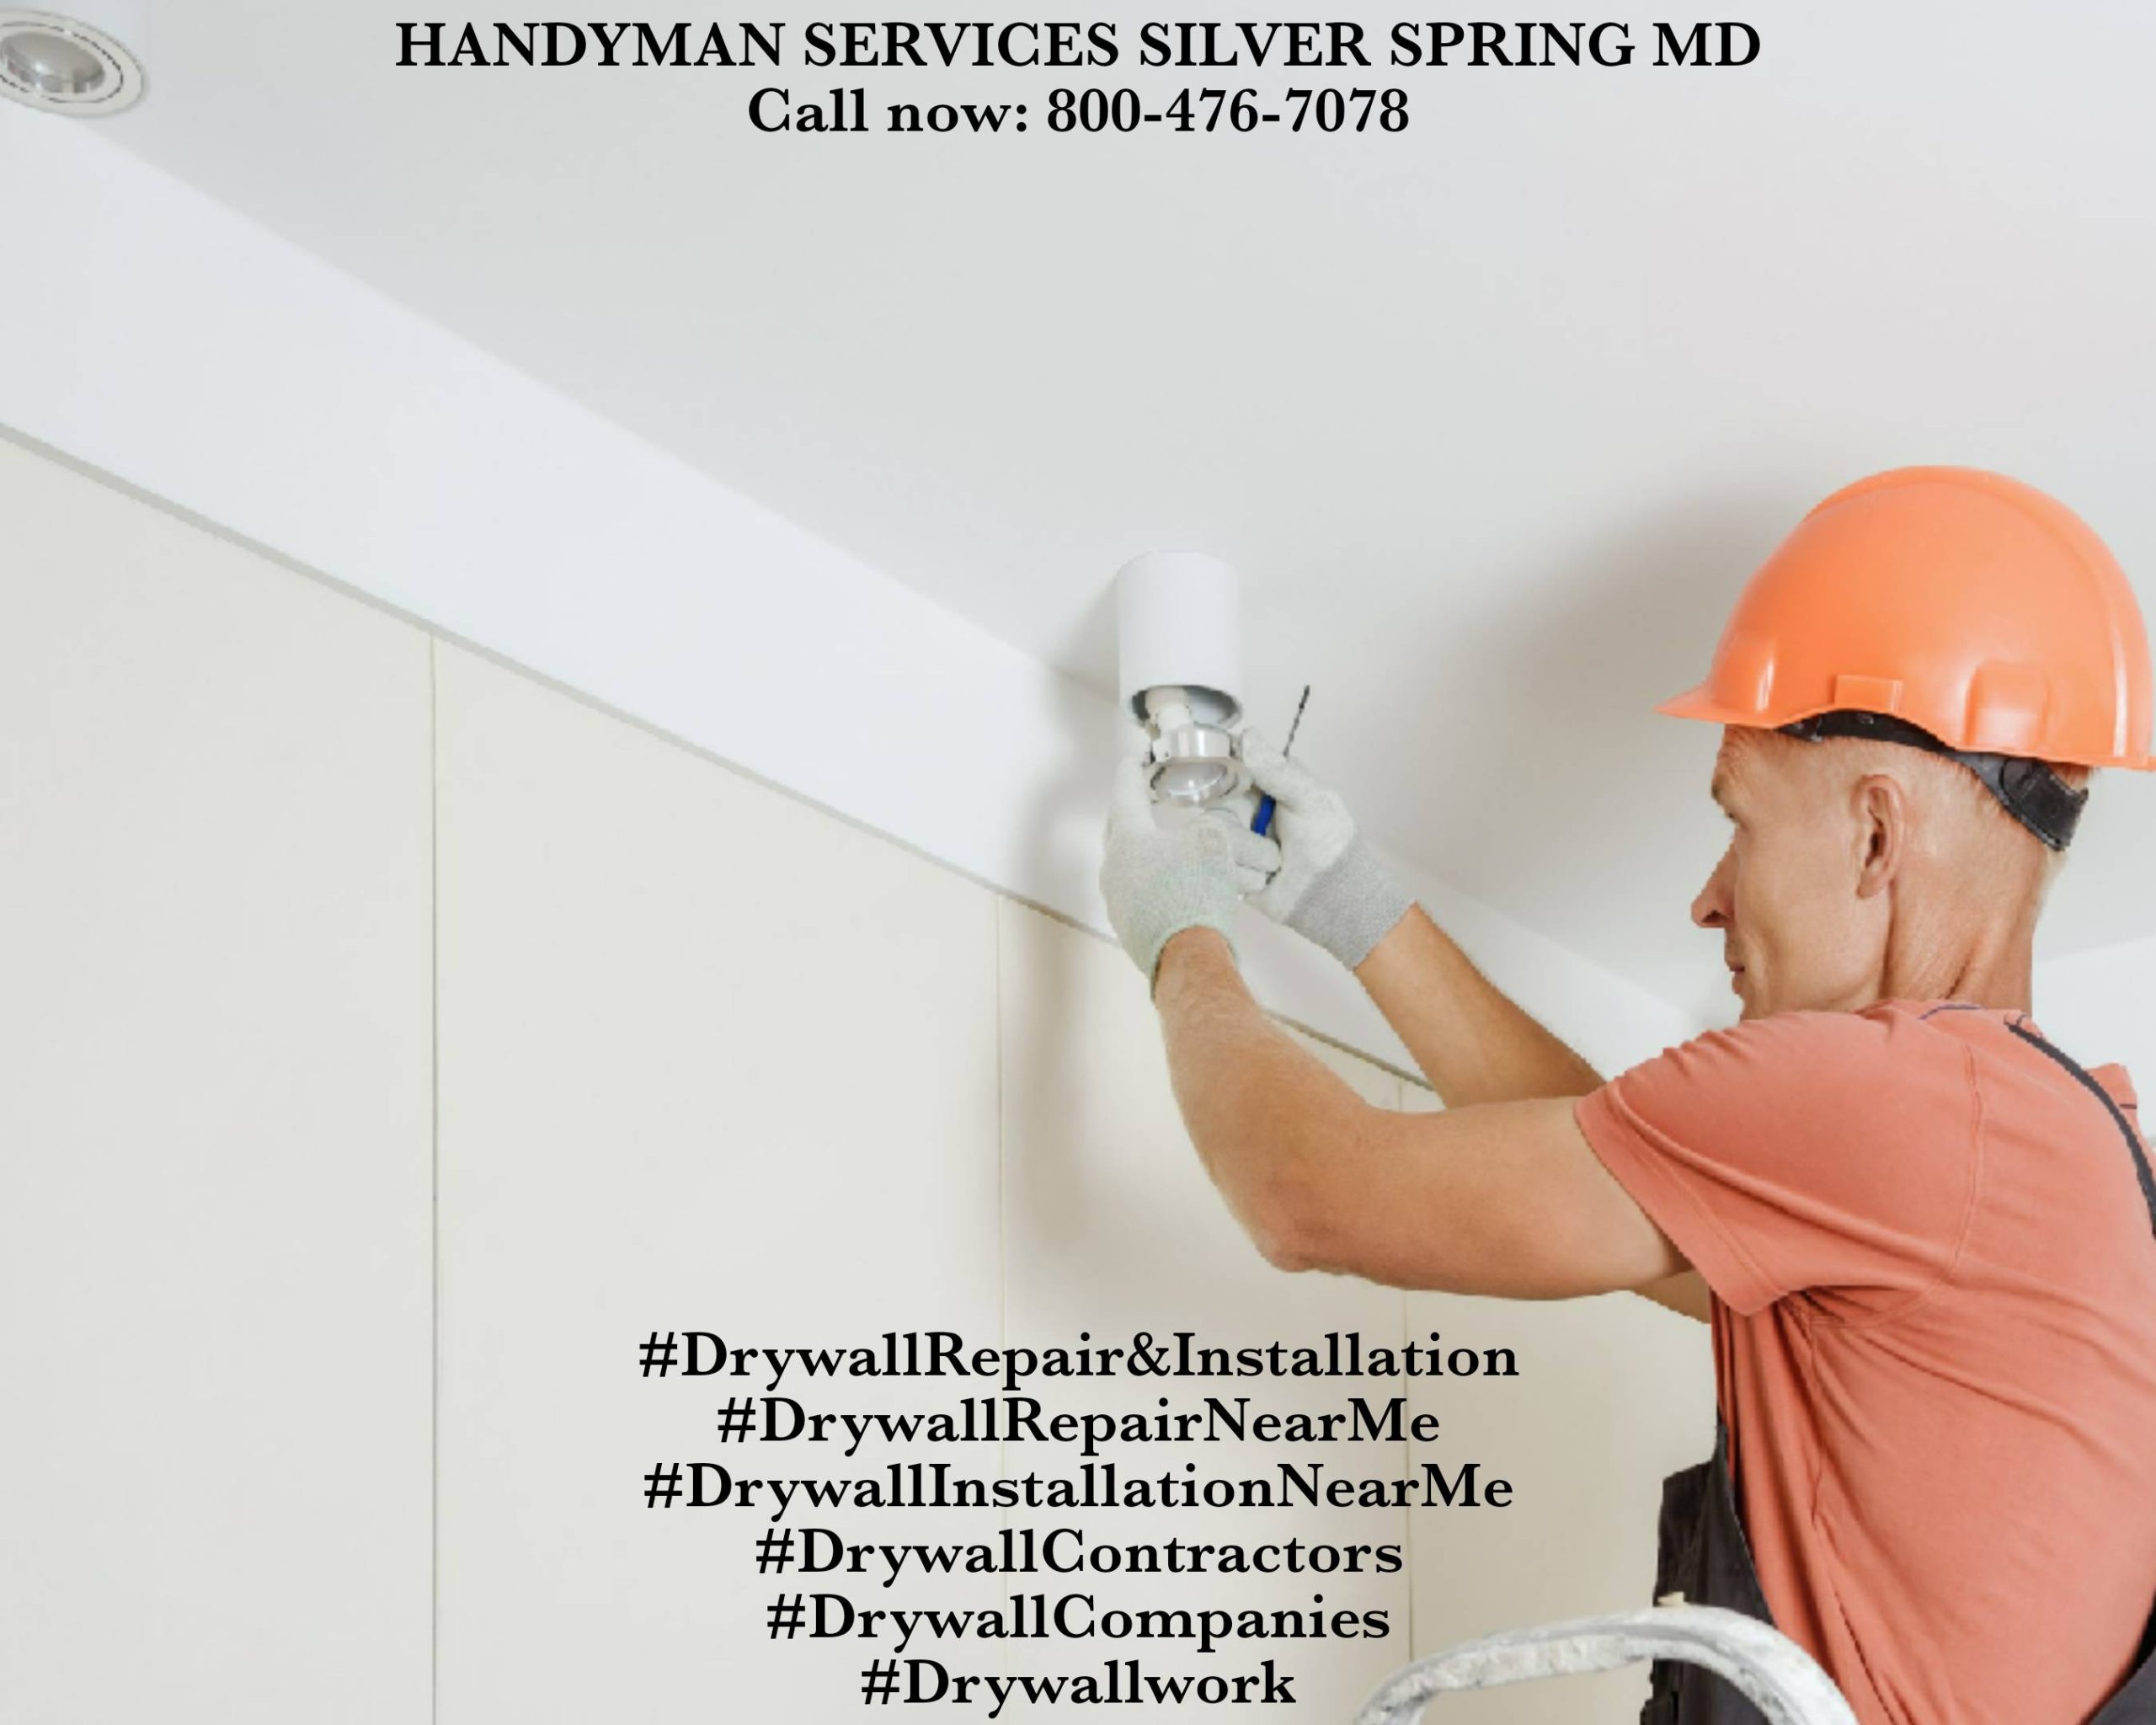 Excellent Service on Drywall Repair & Installation.